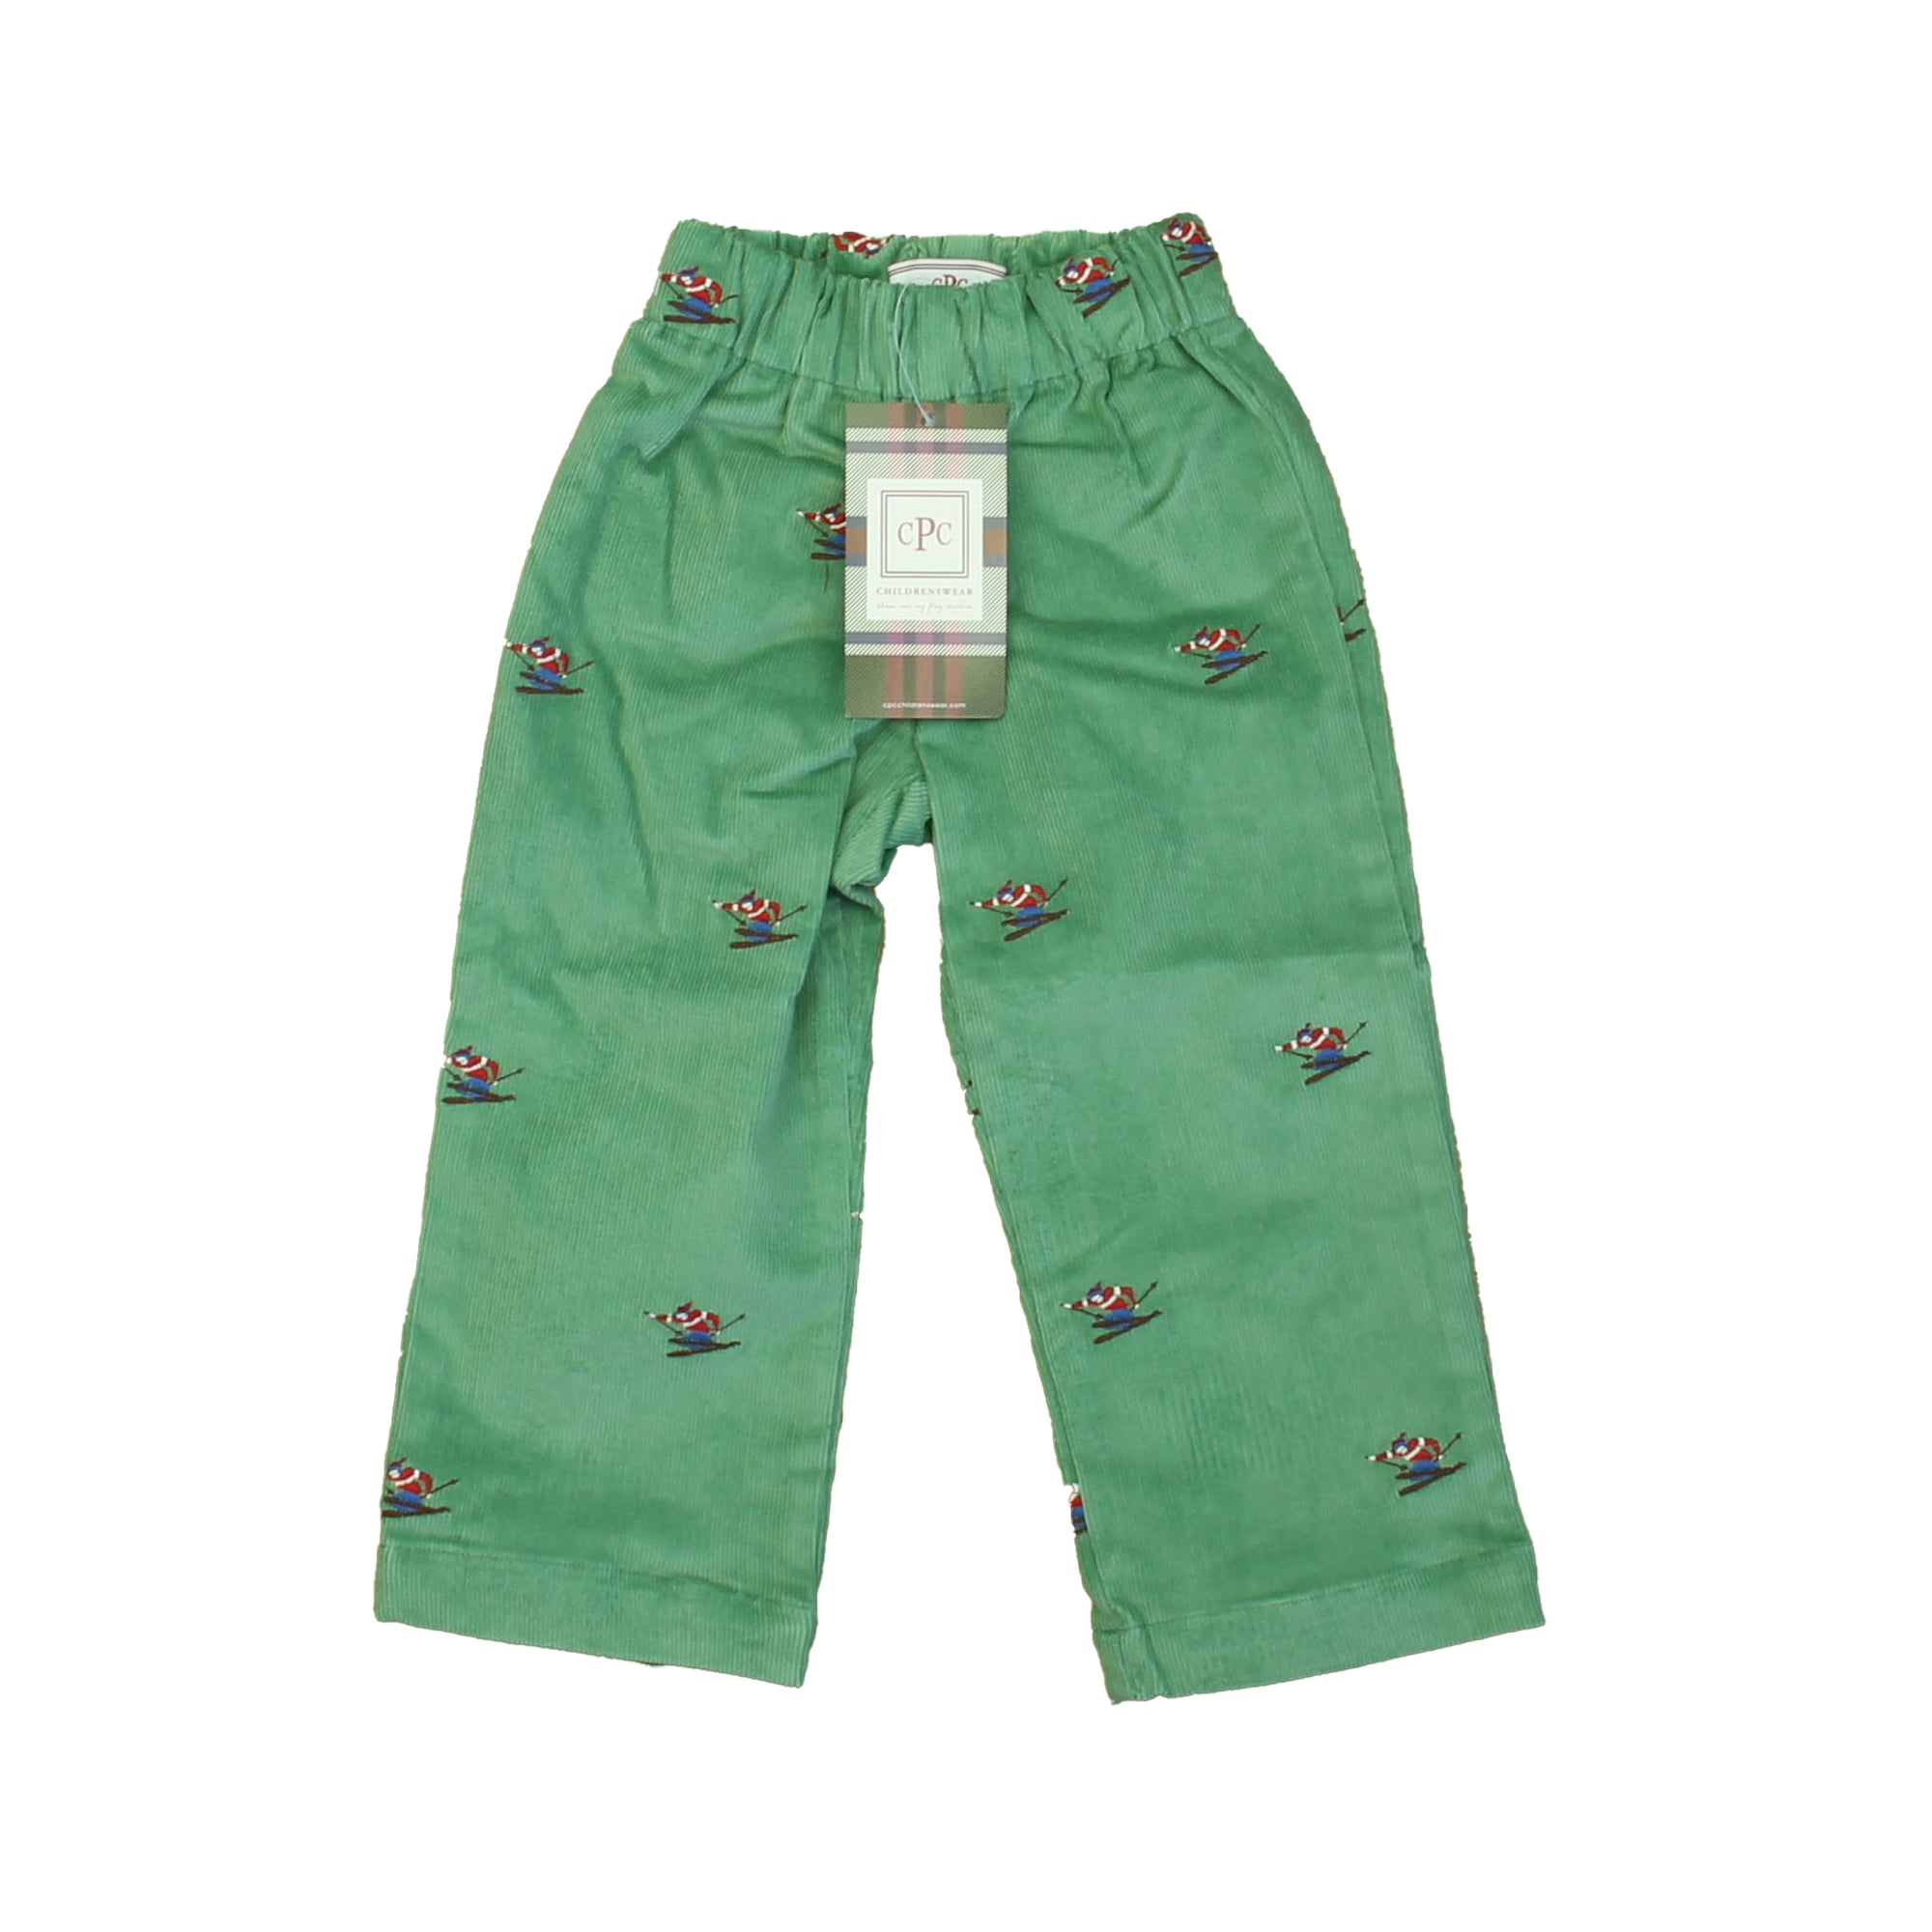 Frosty Spruce with Skier Embroidery / 12-18 months